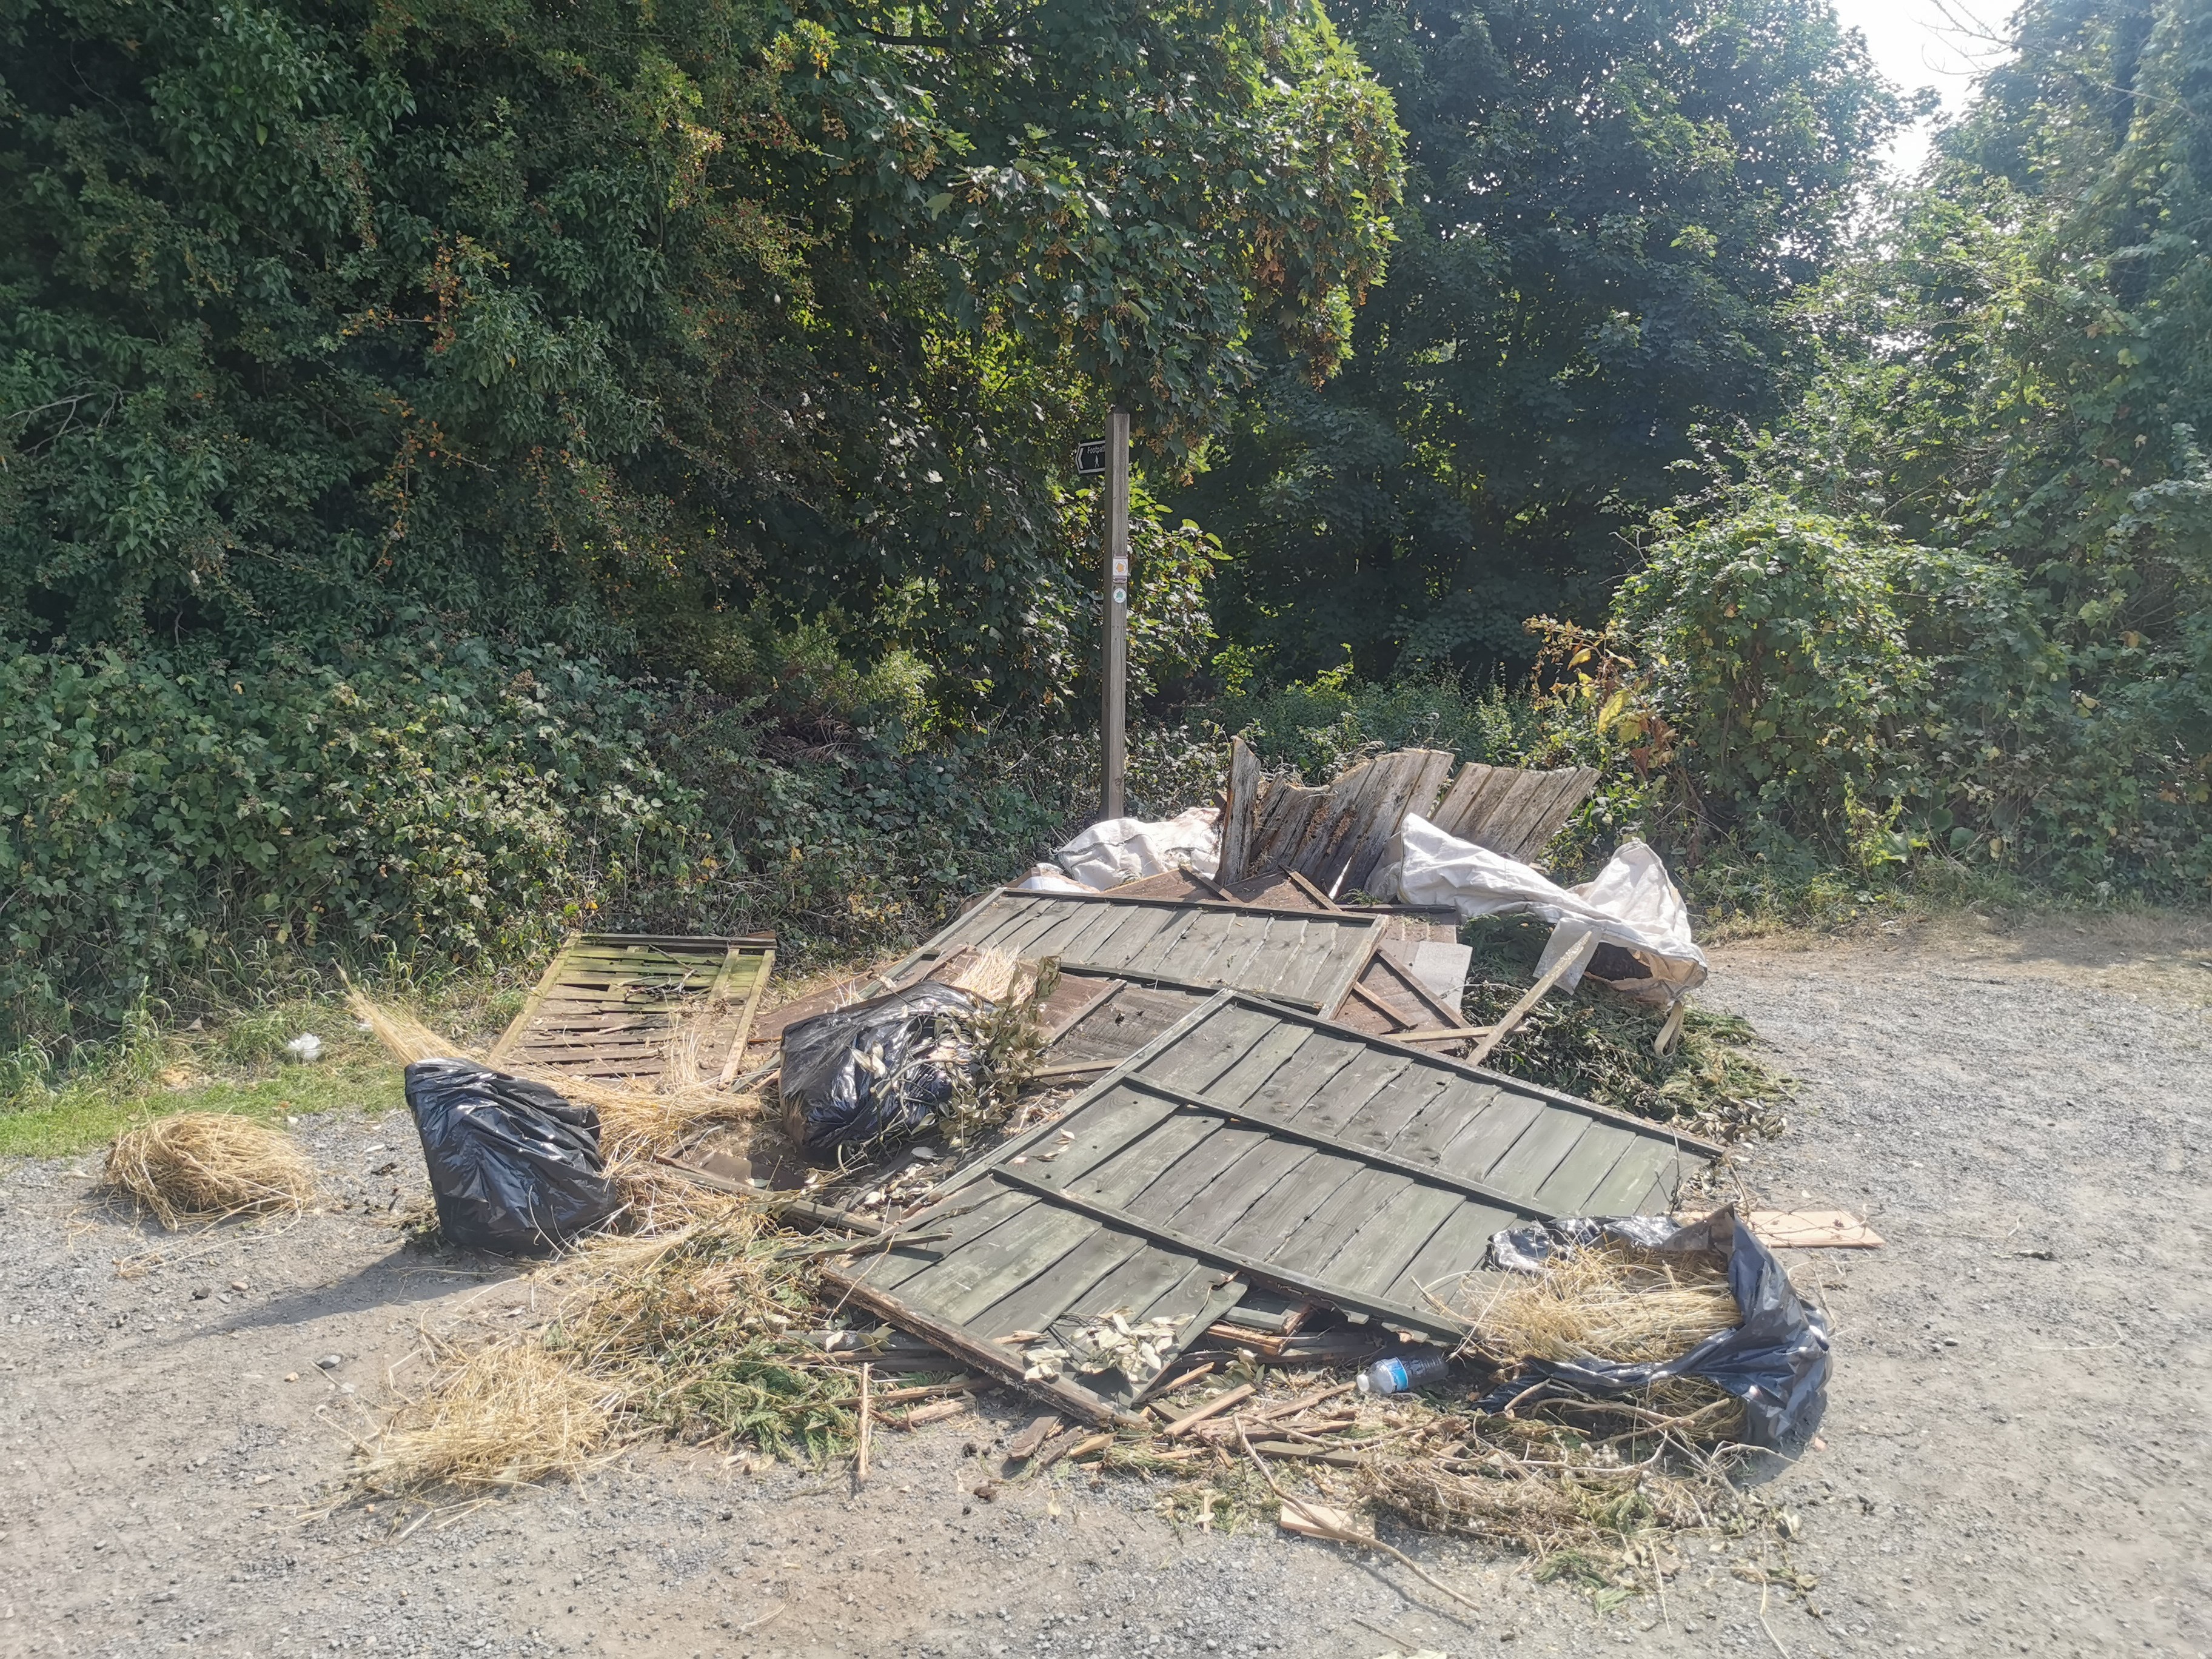 dumped (flytipped) rubbished containing old broken fence panels, black bags, and garden rubbish in a rural area